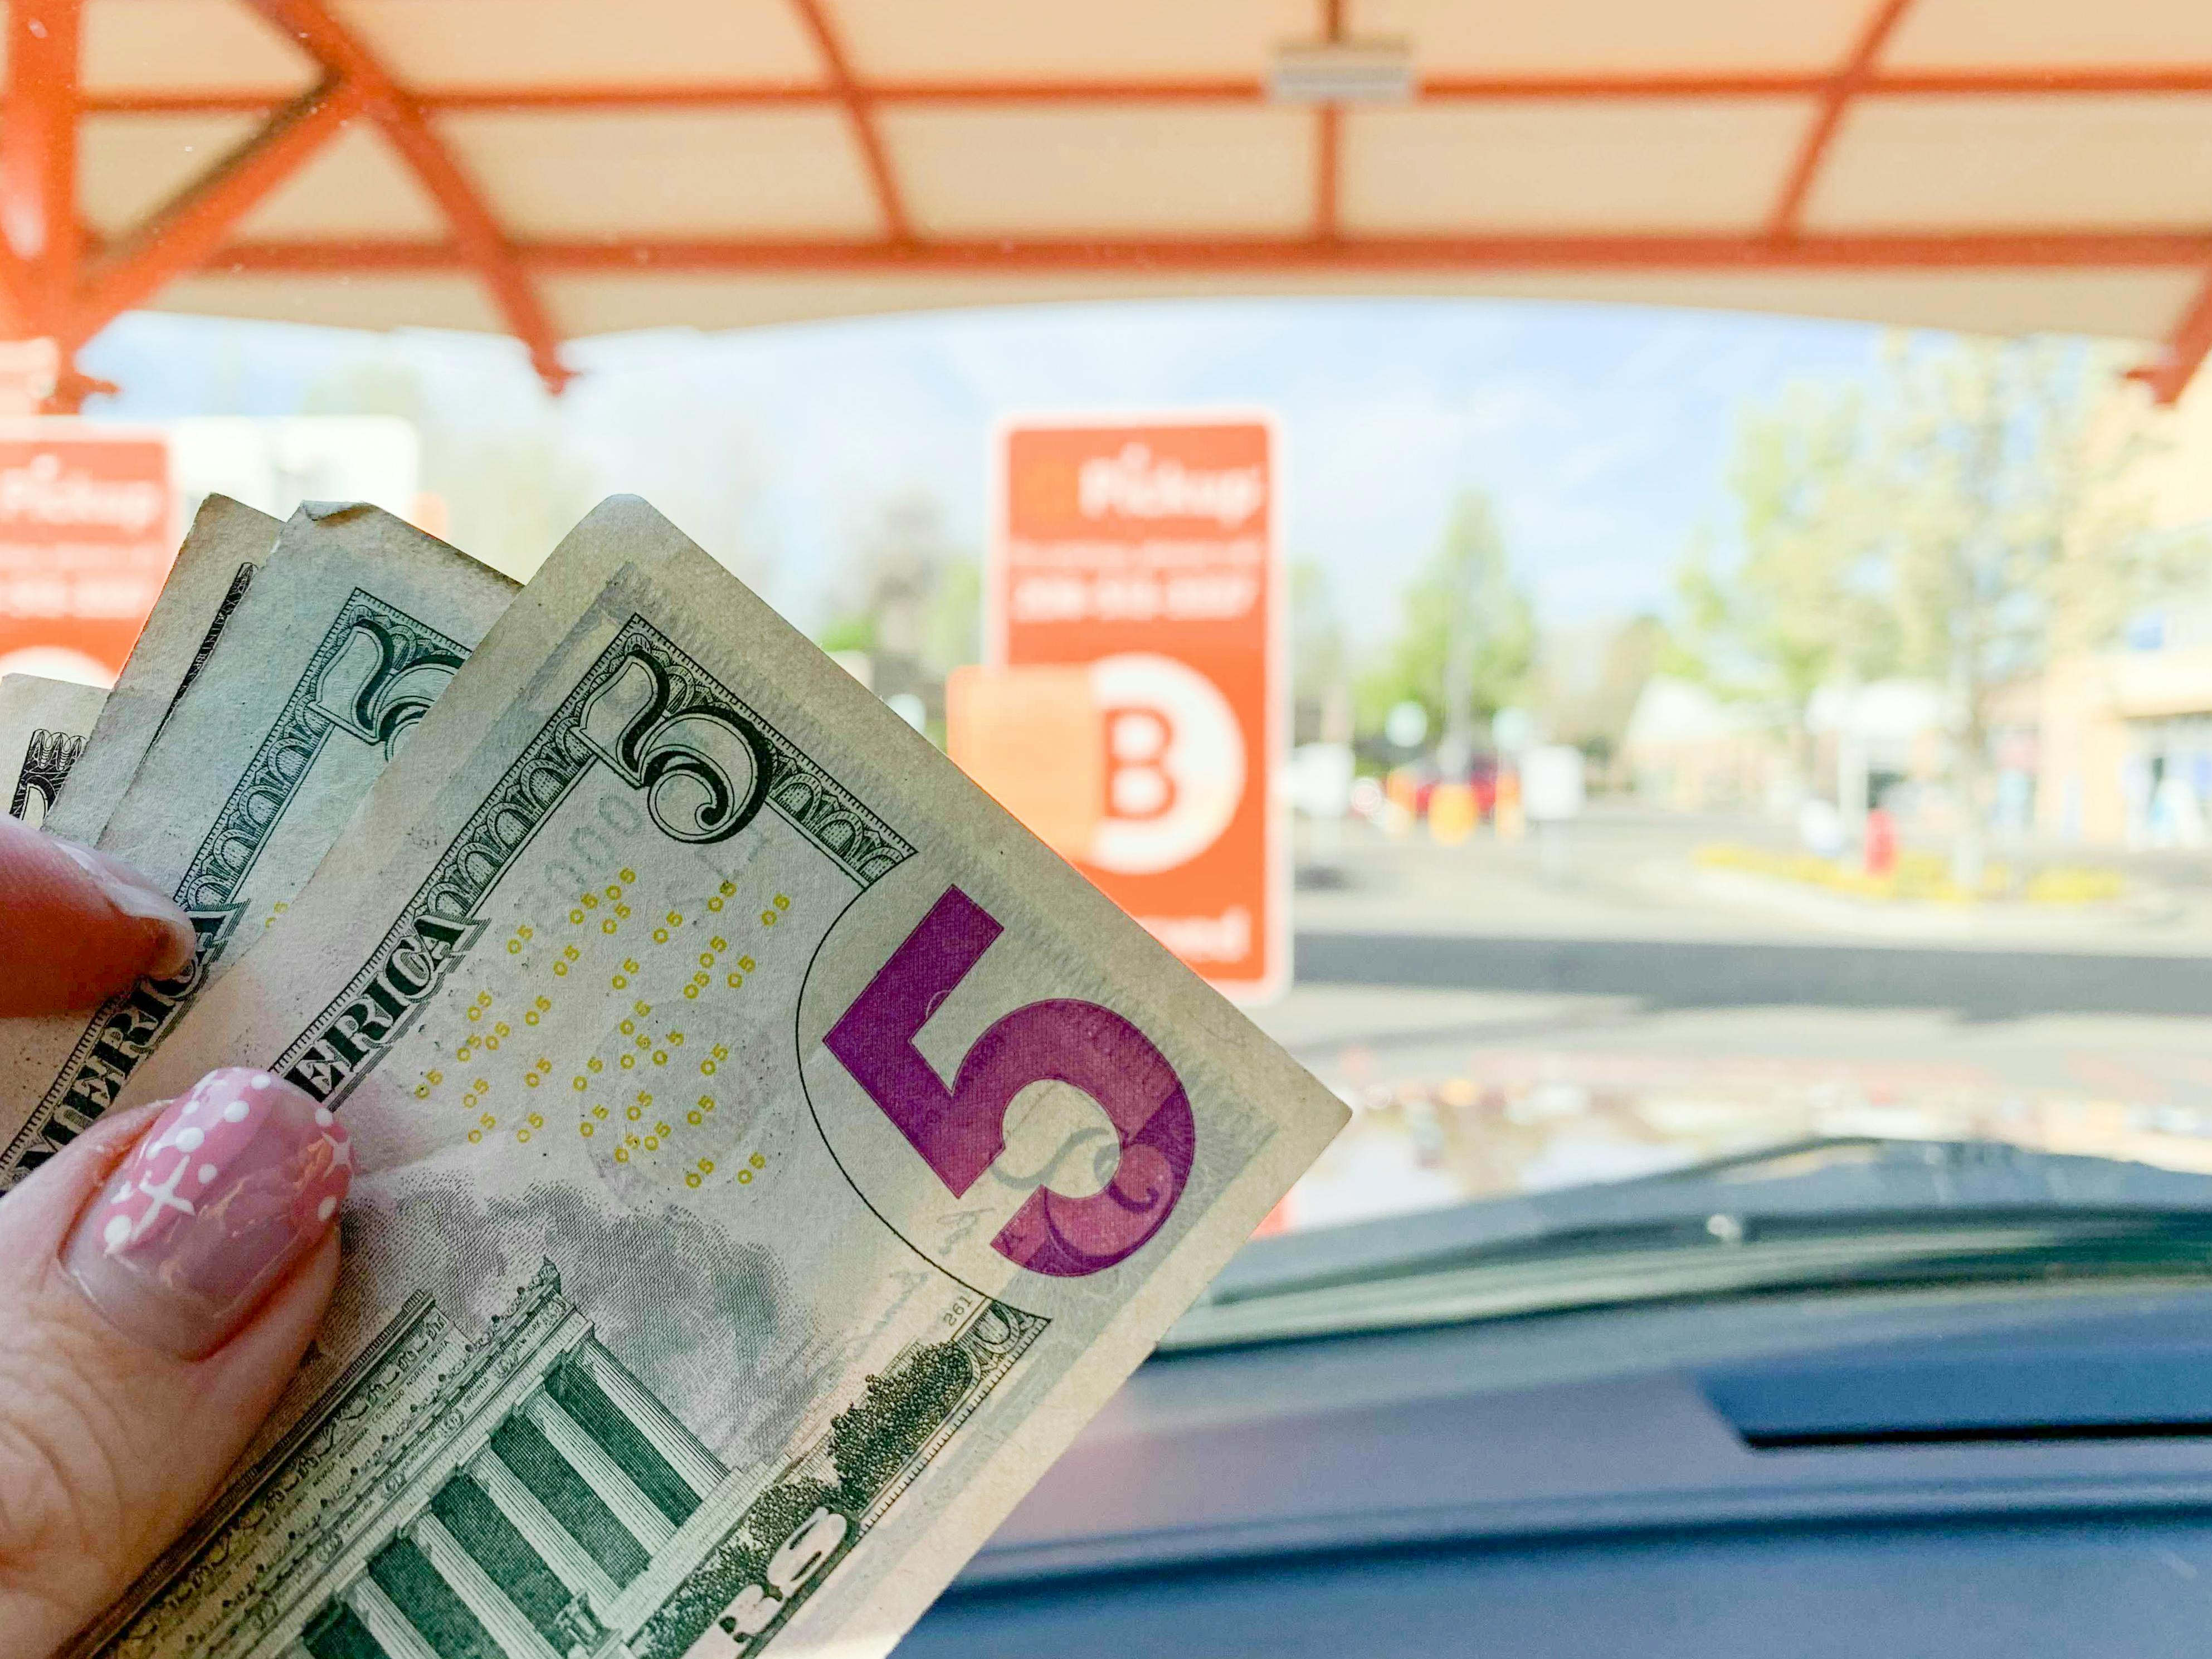 A person holding two $5 bills in front of a grocery pickup sign at Walmart.